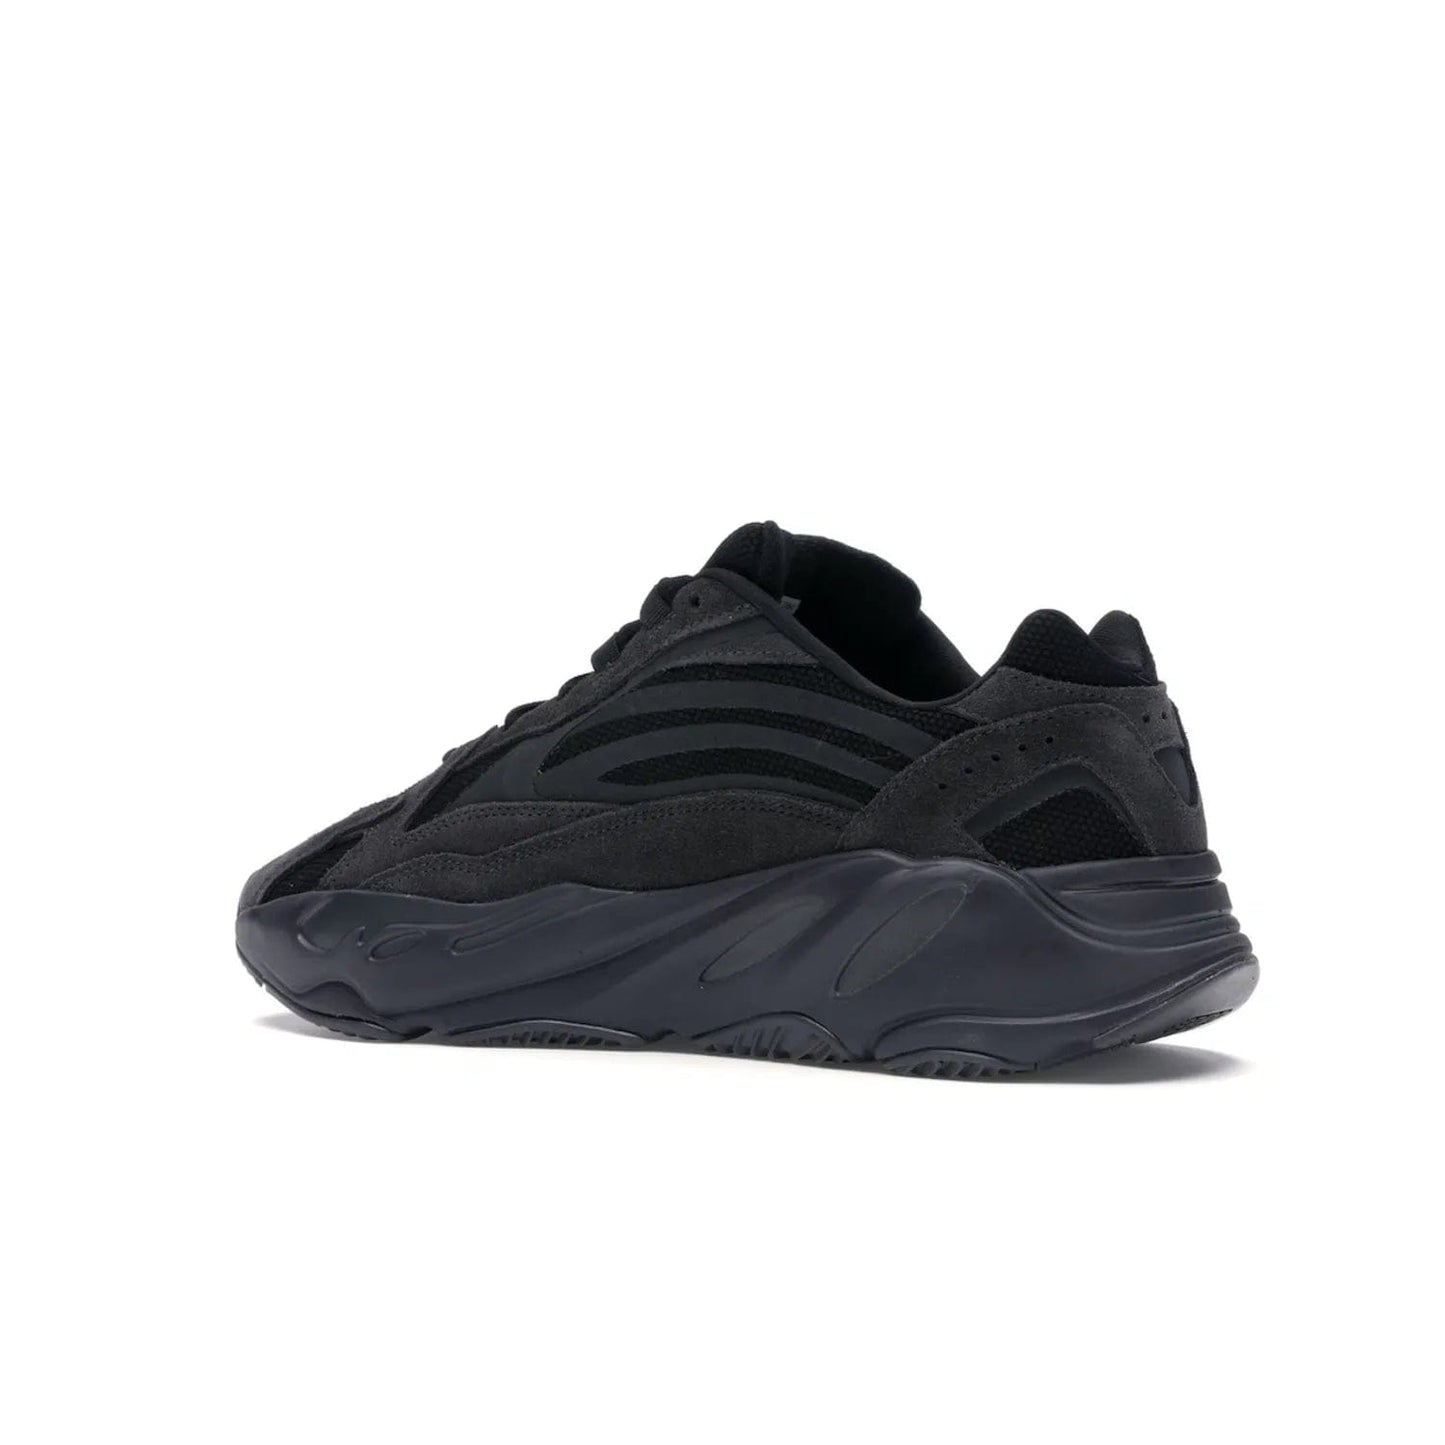 adidas Yeezy Boost 700 V2 Vanta - Image 22 - Only at www.BallersClubKickz.com - Introducing the adidas Yeezy Boost 700 V2 Vanta - a sleek and stylish all-black design featuring a combination of mesh, leather, and suede construction with signature Boost cushioning in the sole. The ultimate in comfort and support.